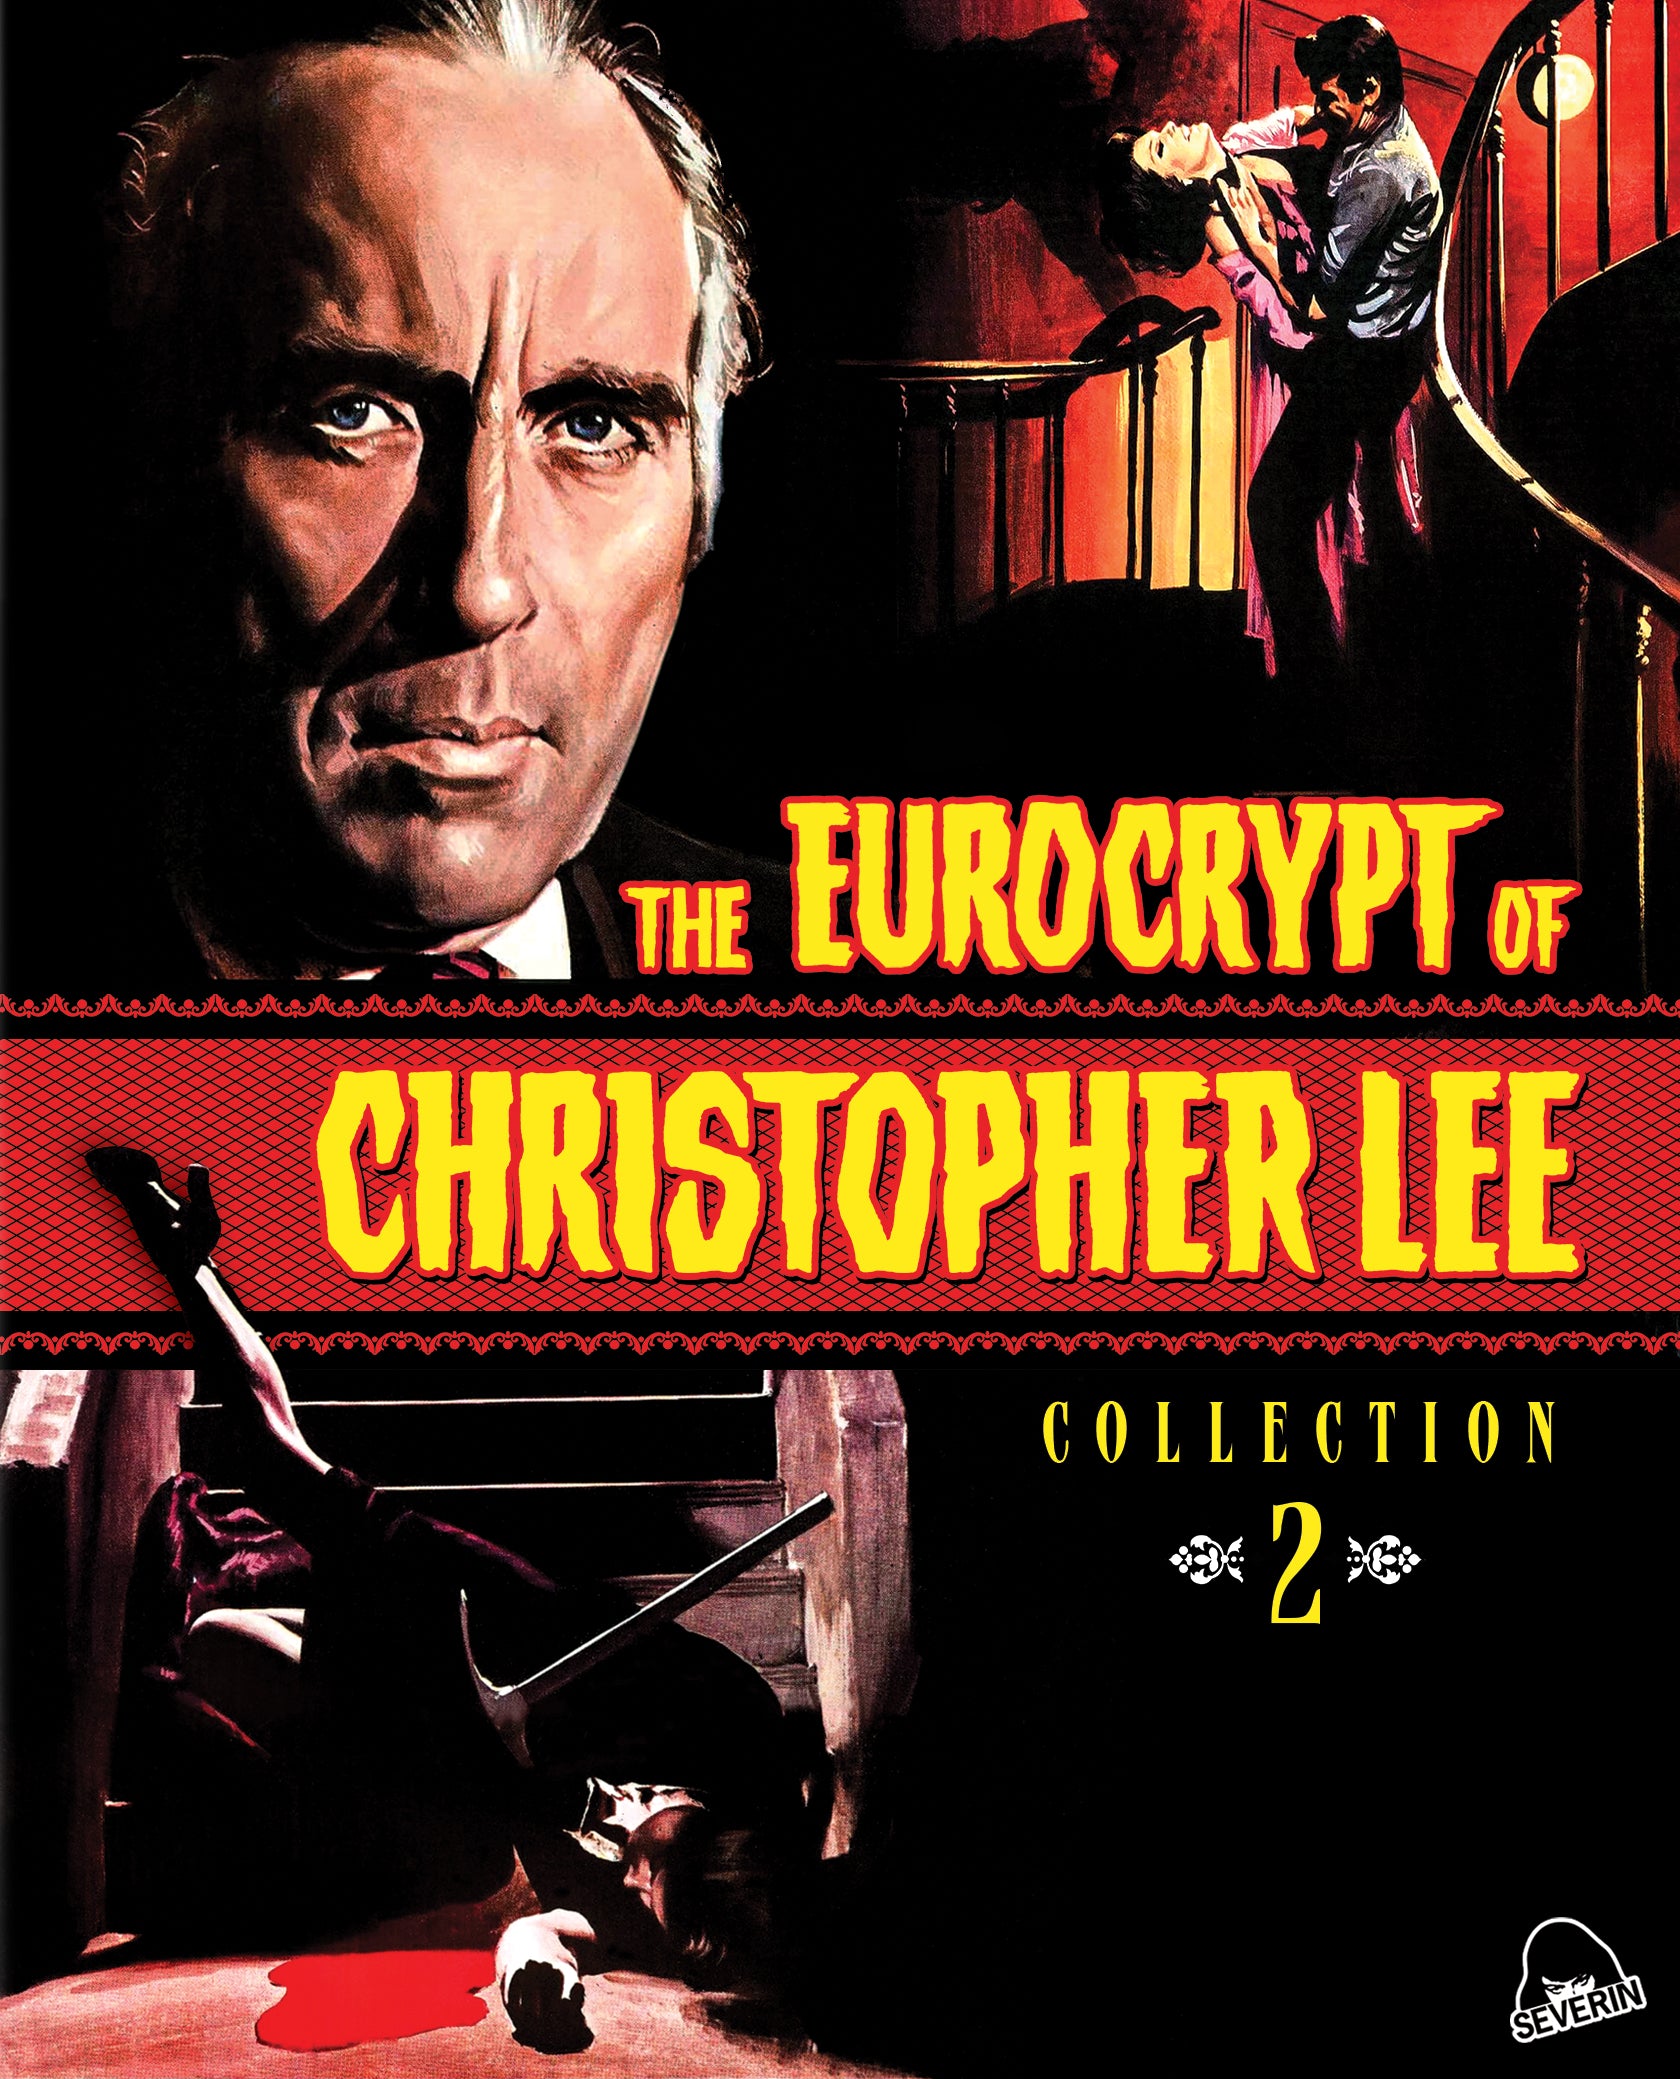 THE EUROCRYPT OF CHRISTOPHER LEE COLLECTION 2 (LIMITED EDITION) BLU-RAY/CD